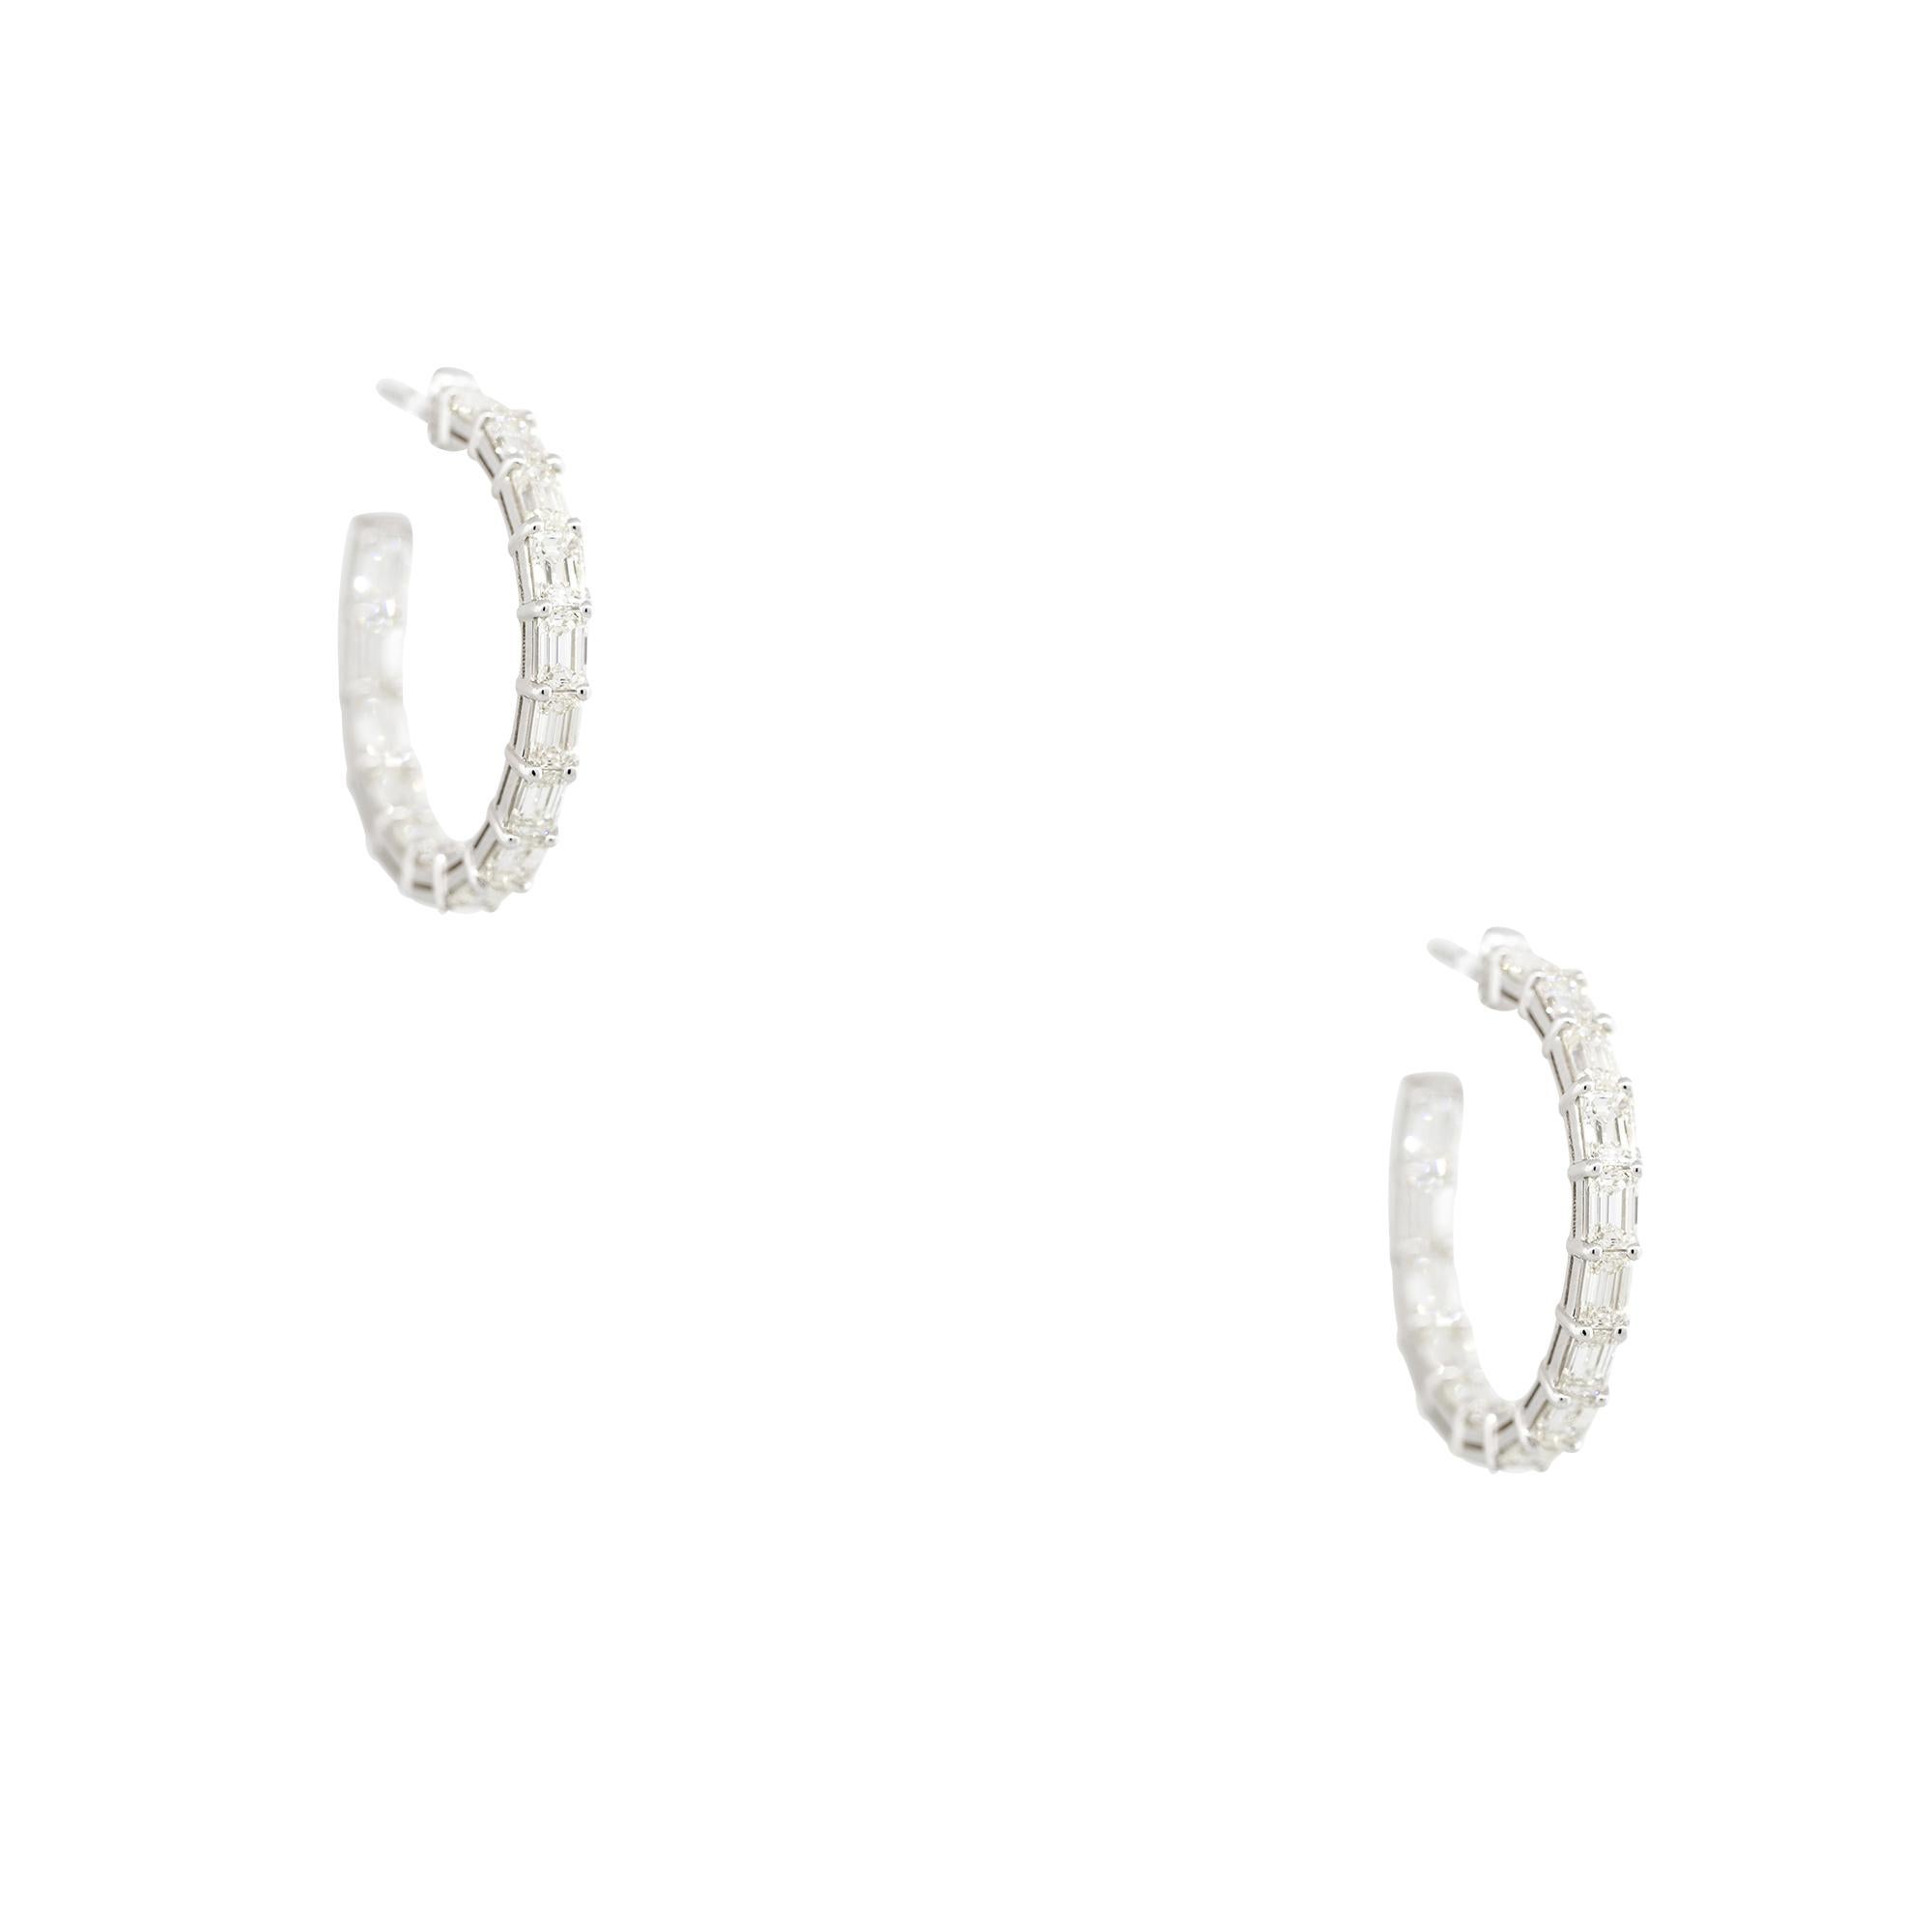 18k White Gold 5.70ctw Emerald Cut Diamond Hoop Earrings
Material: 18k White Gold
Diamond Details: Approximately 5.70ctw of Emerald cut Diamonds. Diamonds are set inside out on the hoop earrings. Diamonds are approximately H/I in color and